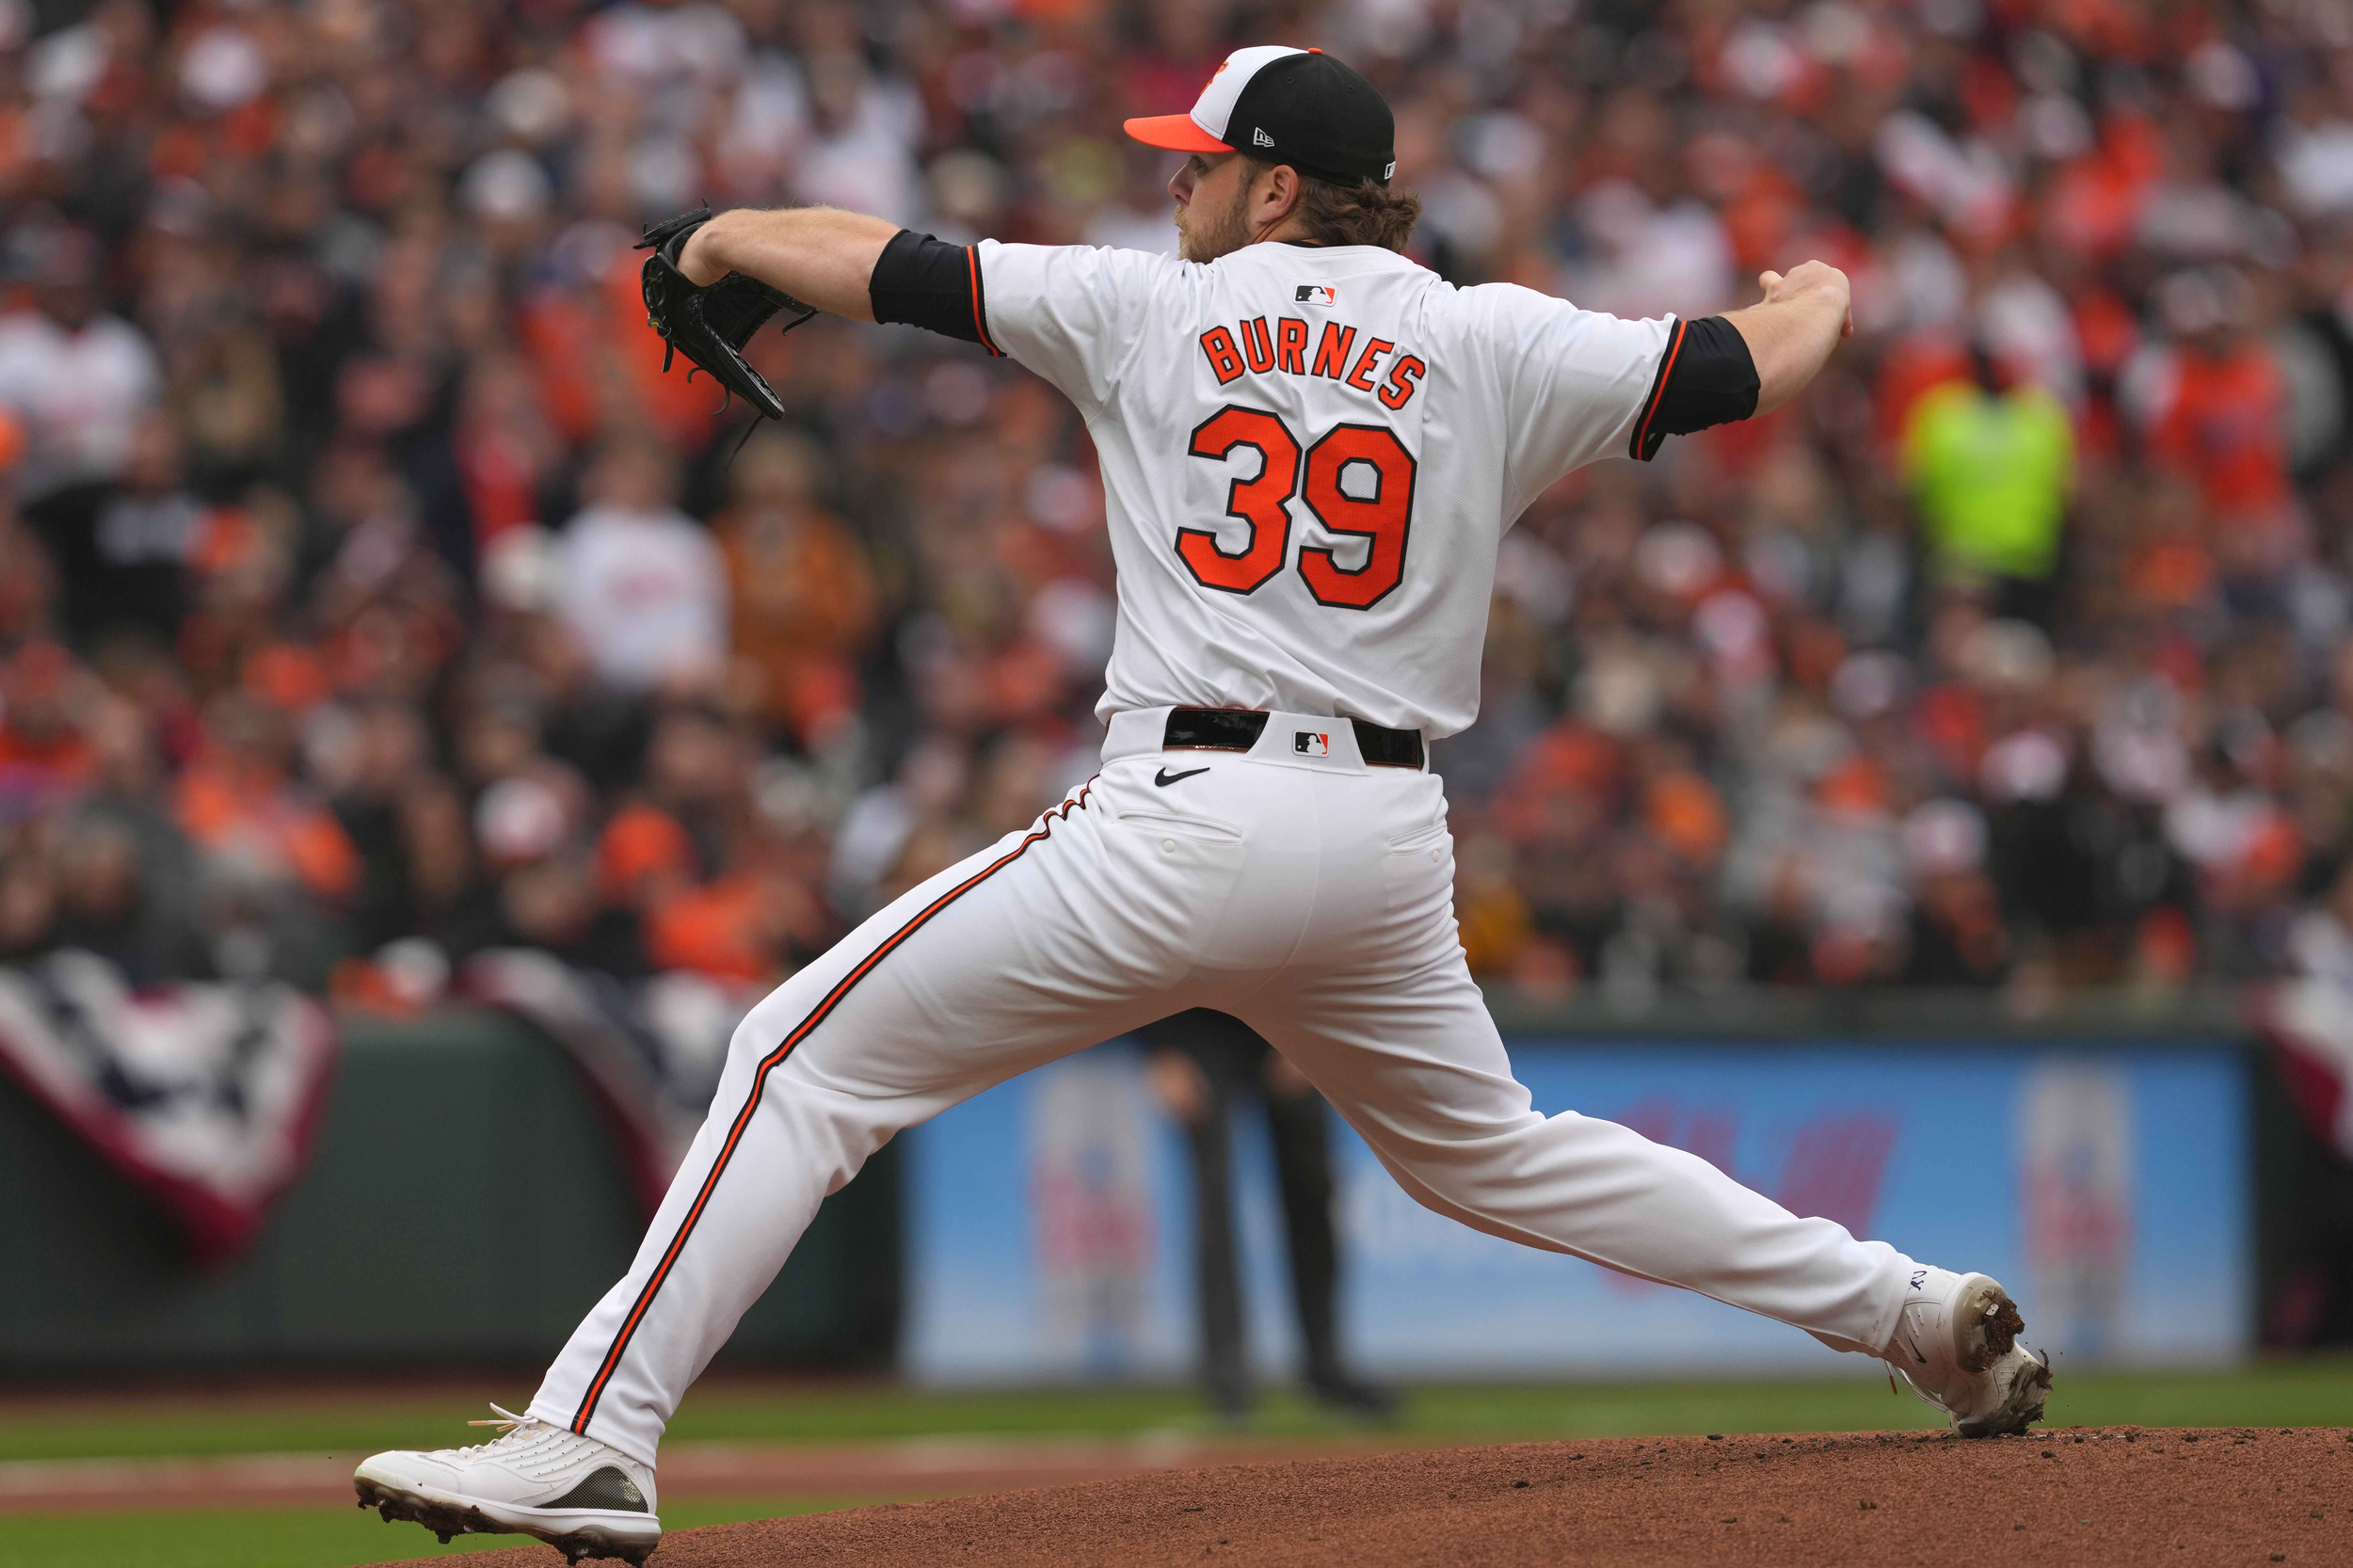 corbin burnes dominates in orioles debut, significantly raises their ceiling